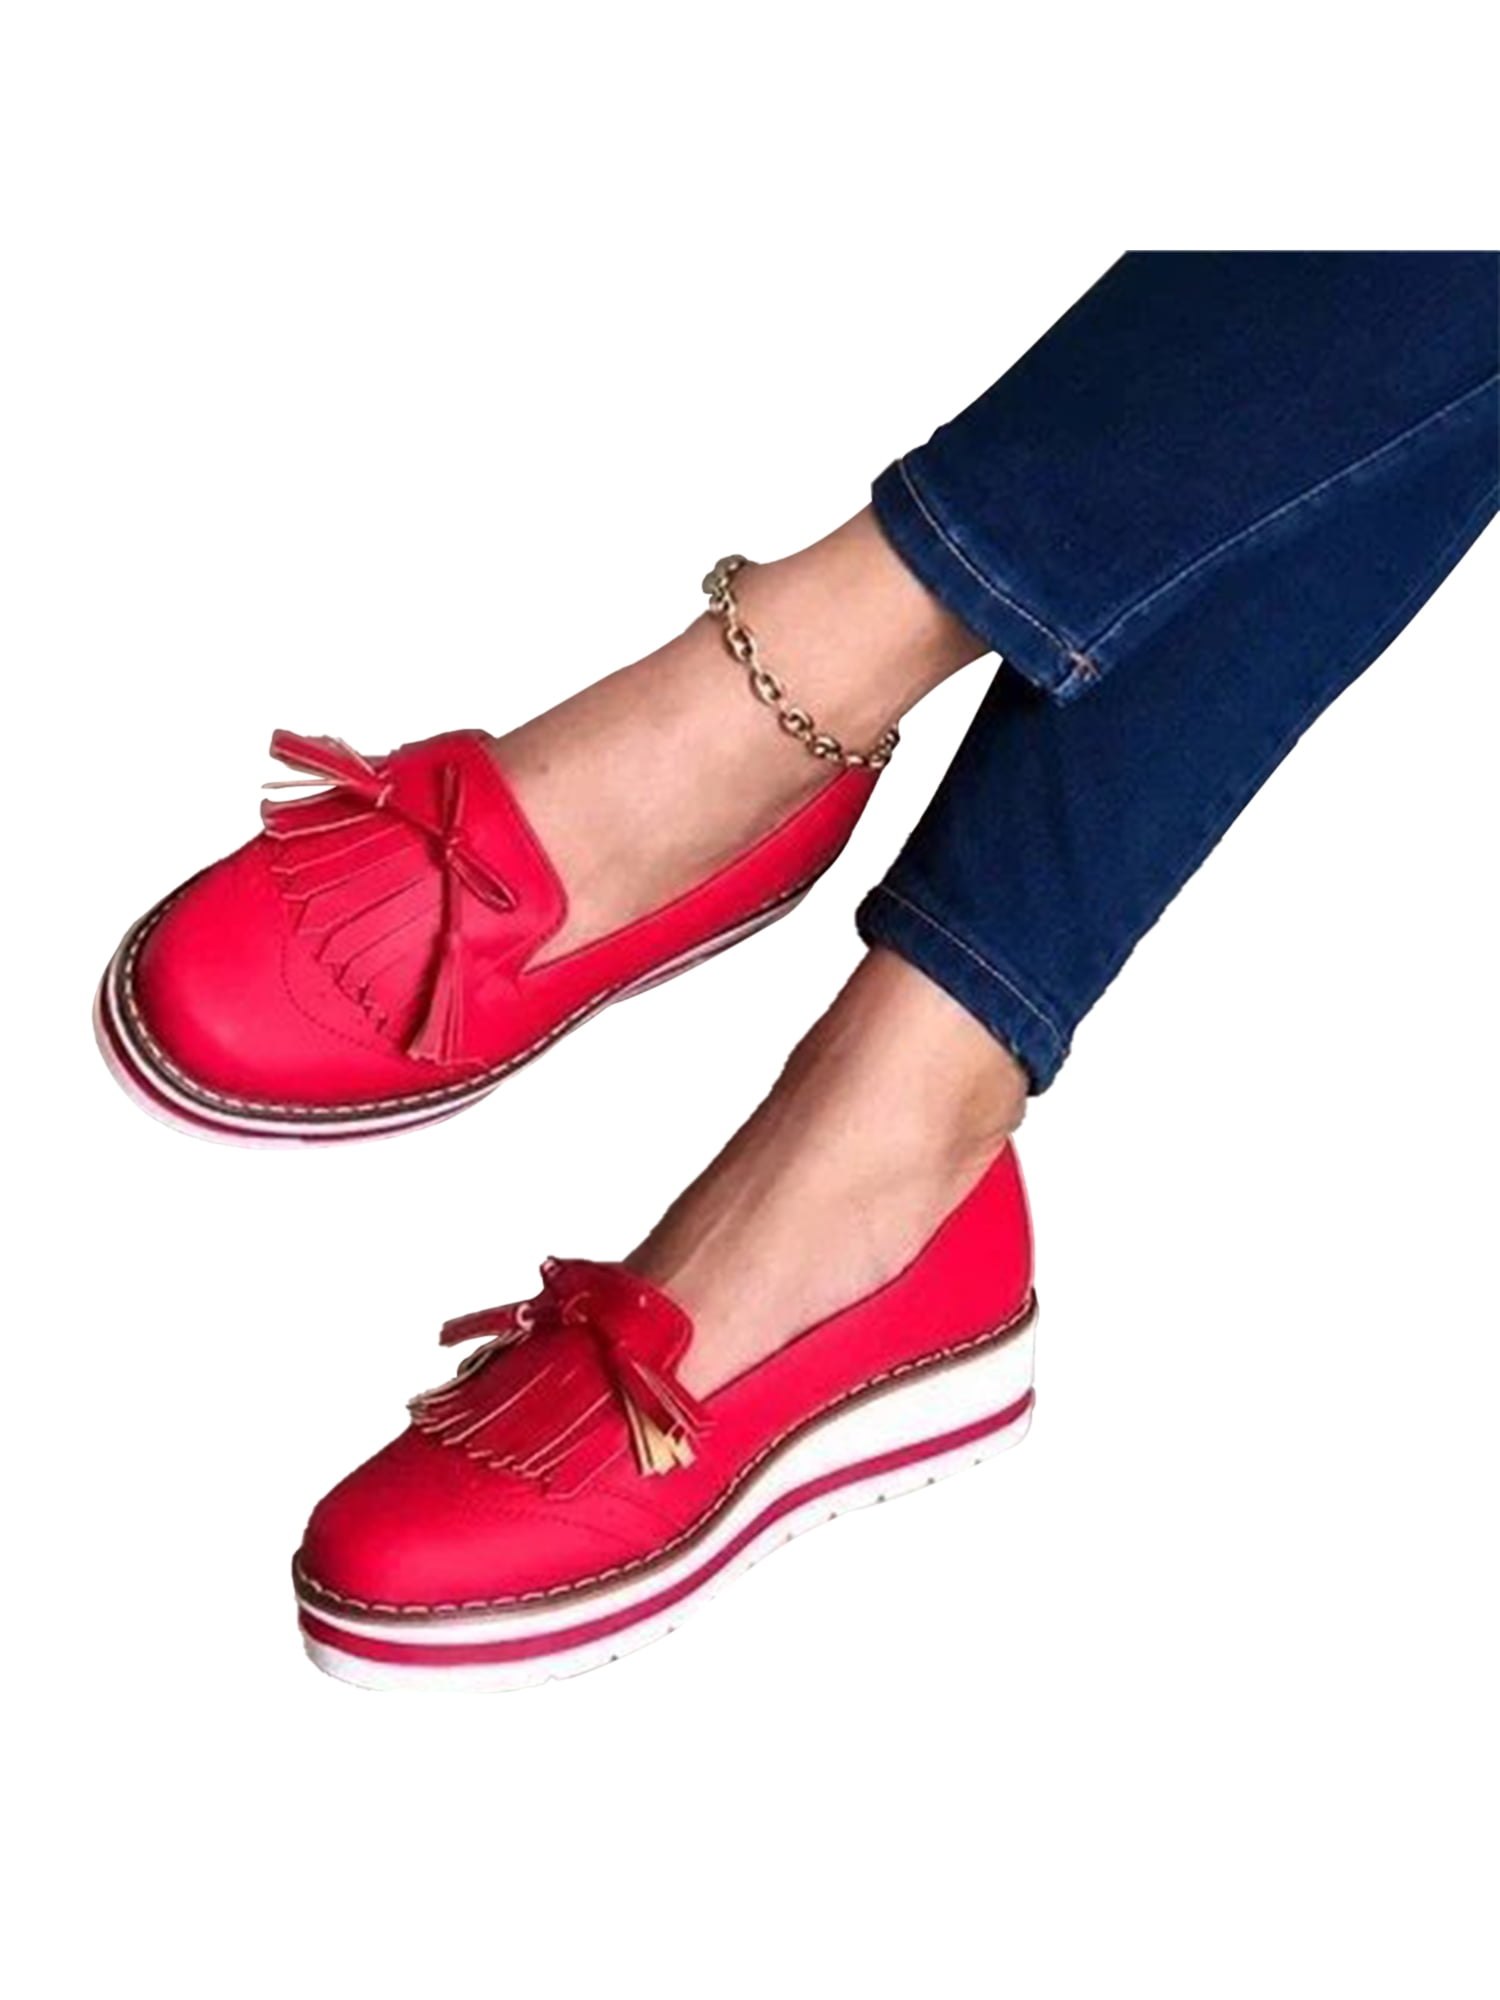 Tooled Leather Shoes Shoes Womens Shoes Sneakers & Athletic Shoes Slip Ons Mint Handmade Women Leather Shoes Casual Formal Loafers Women Sneakers DAILY FLAT SHOES Handicraft Lace Up Shoes 